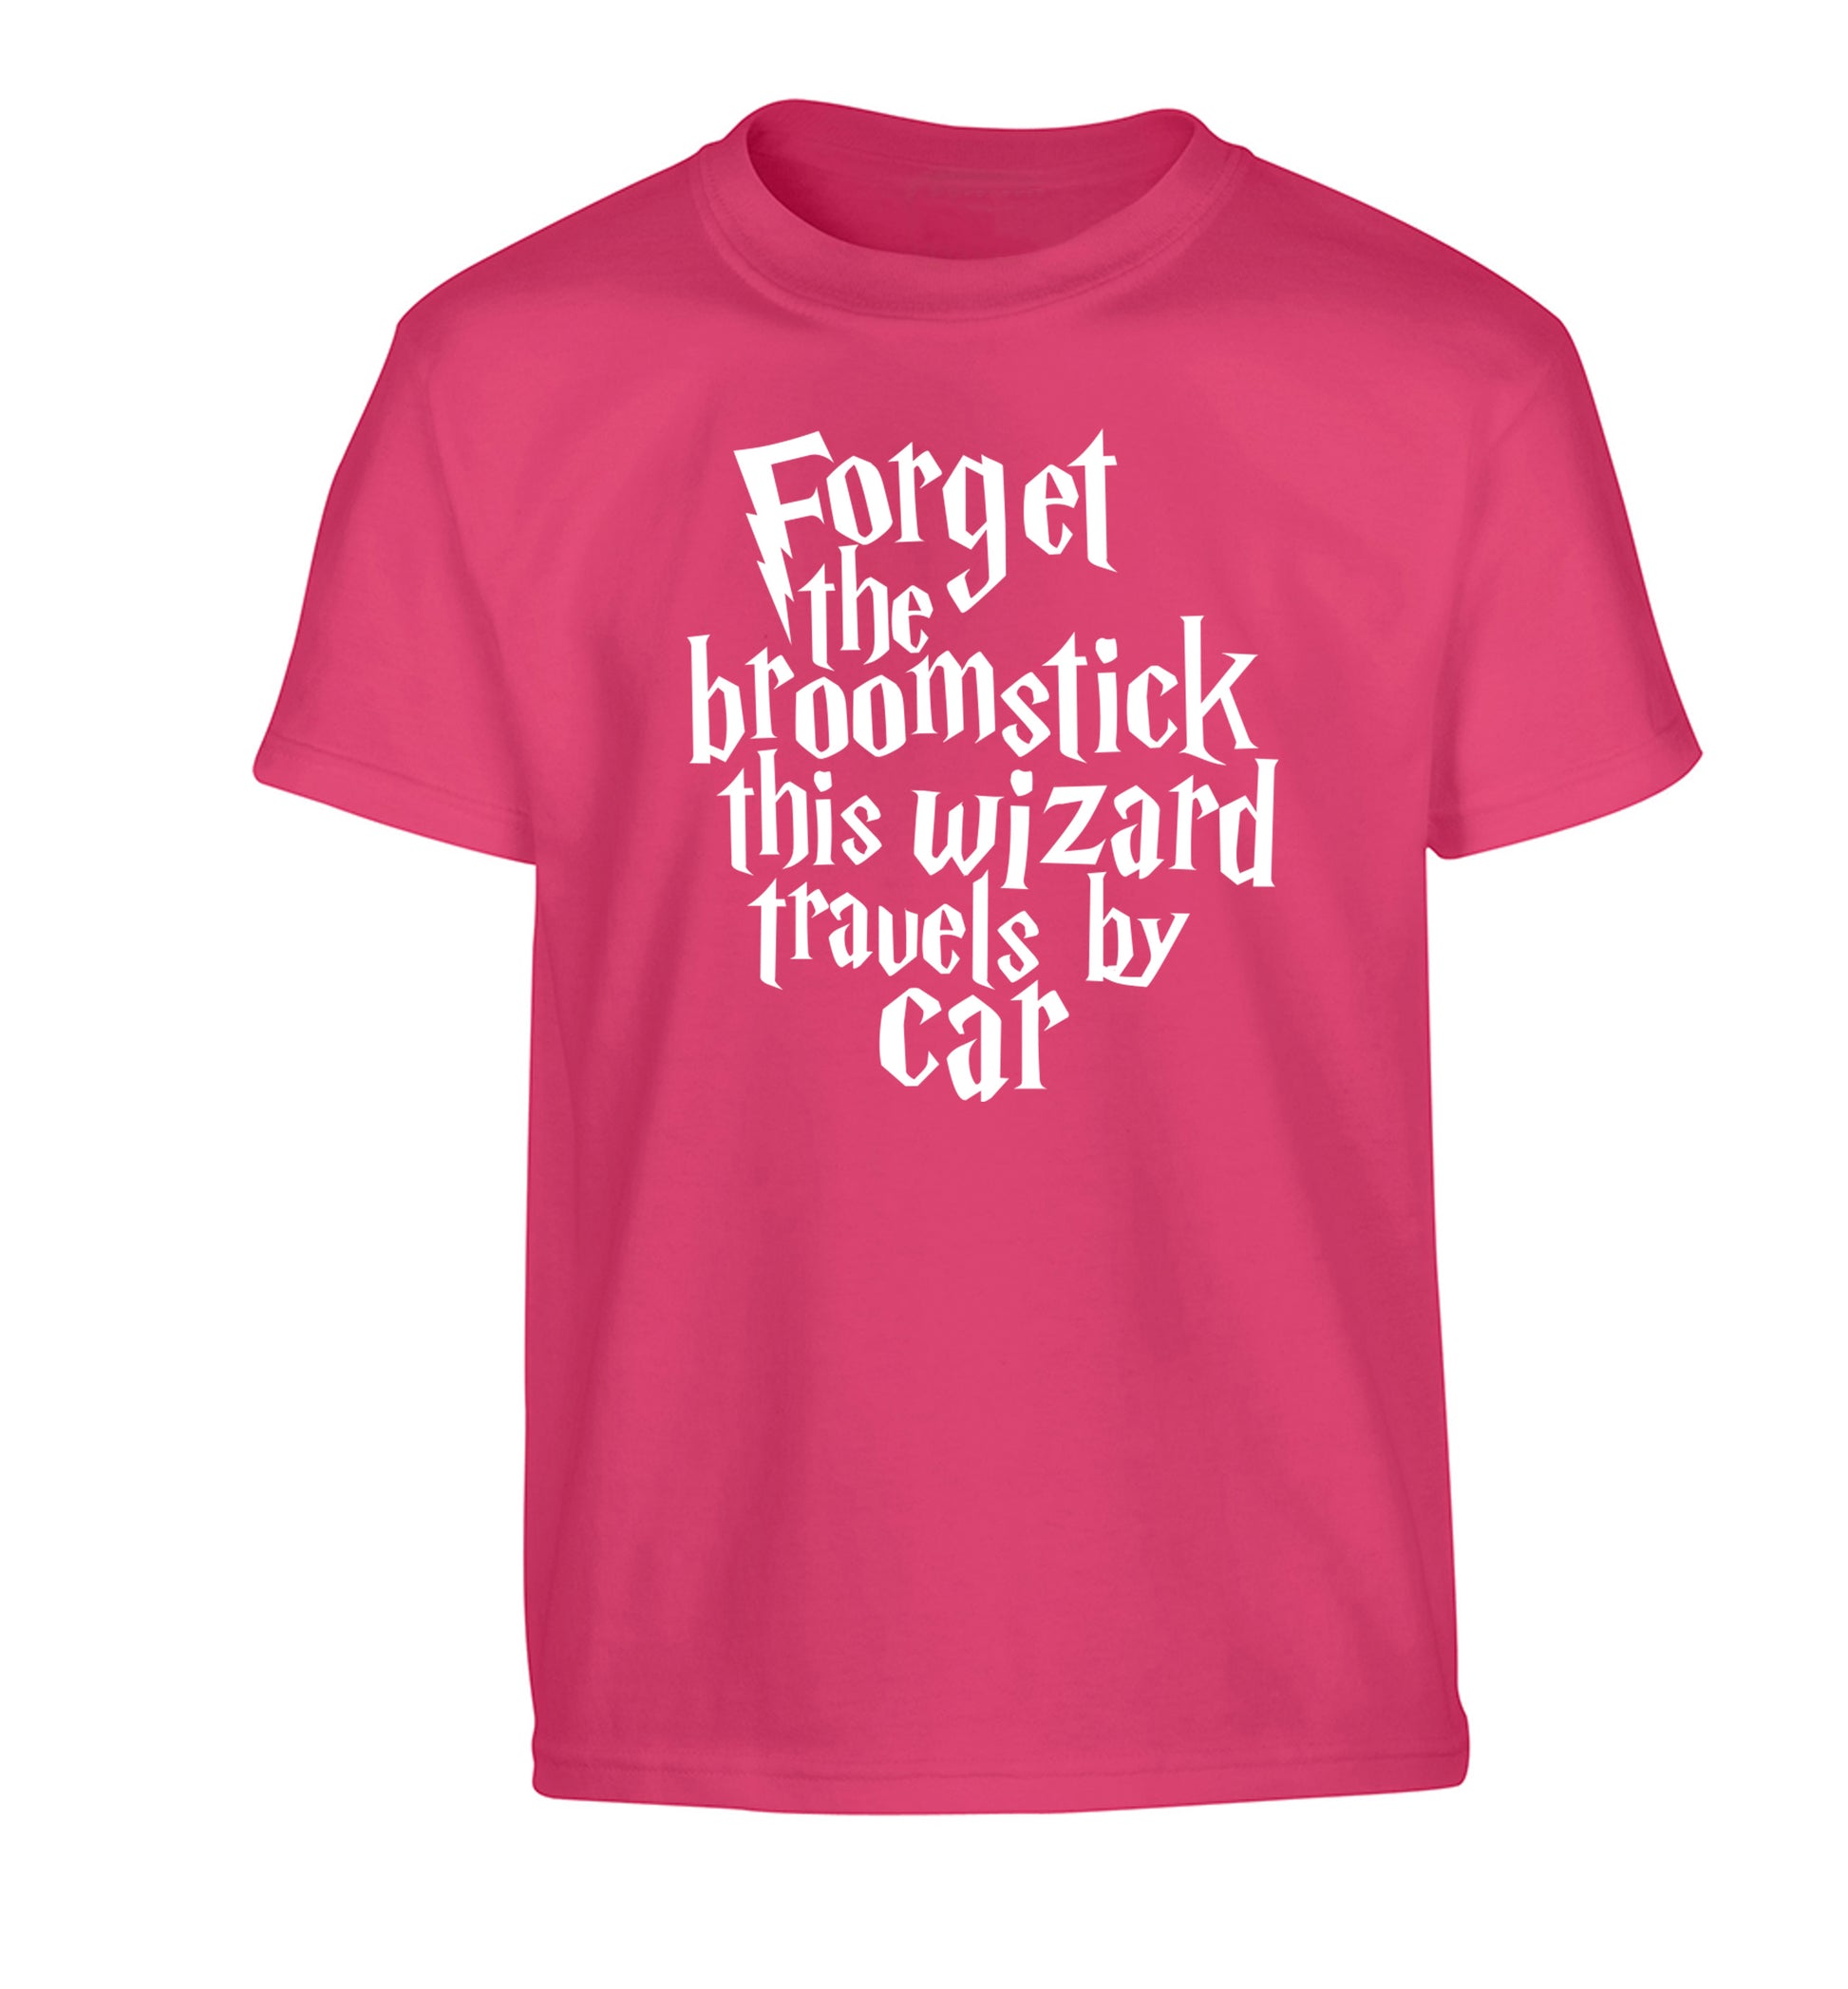 Forget the broomstick this wizard travels by car Children's pink Tshirt 12-14 Years